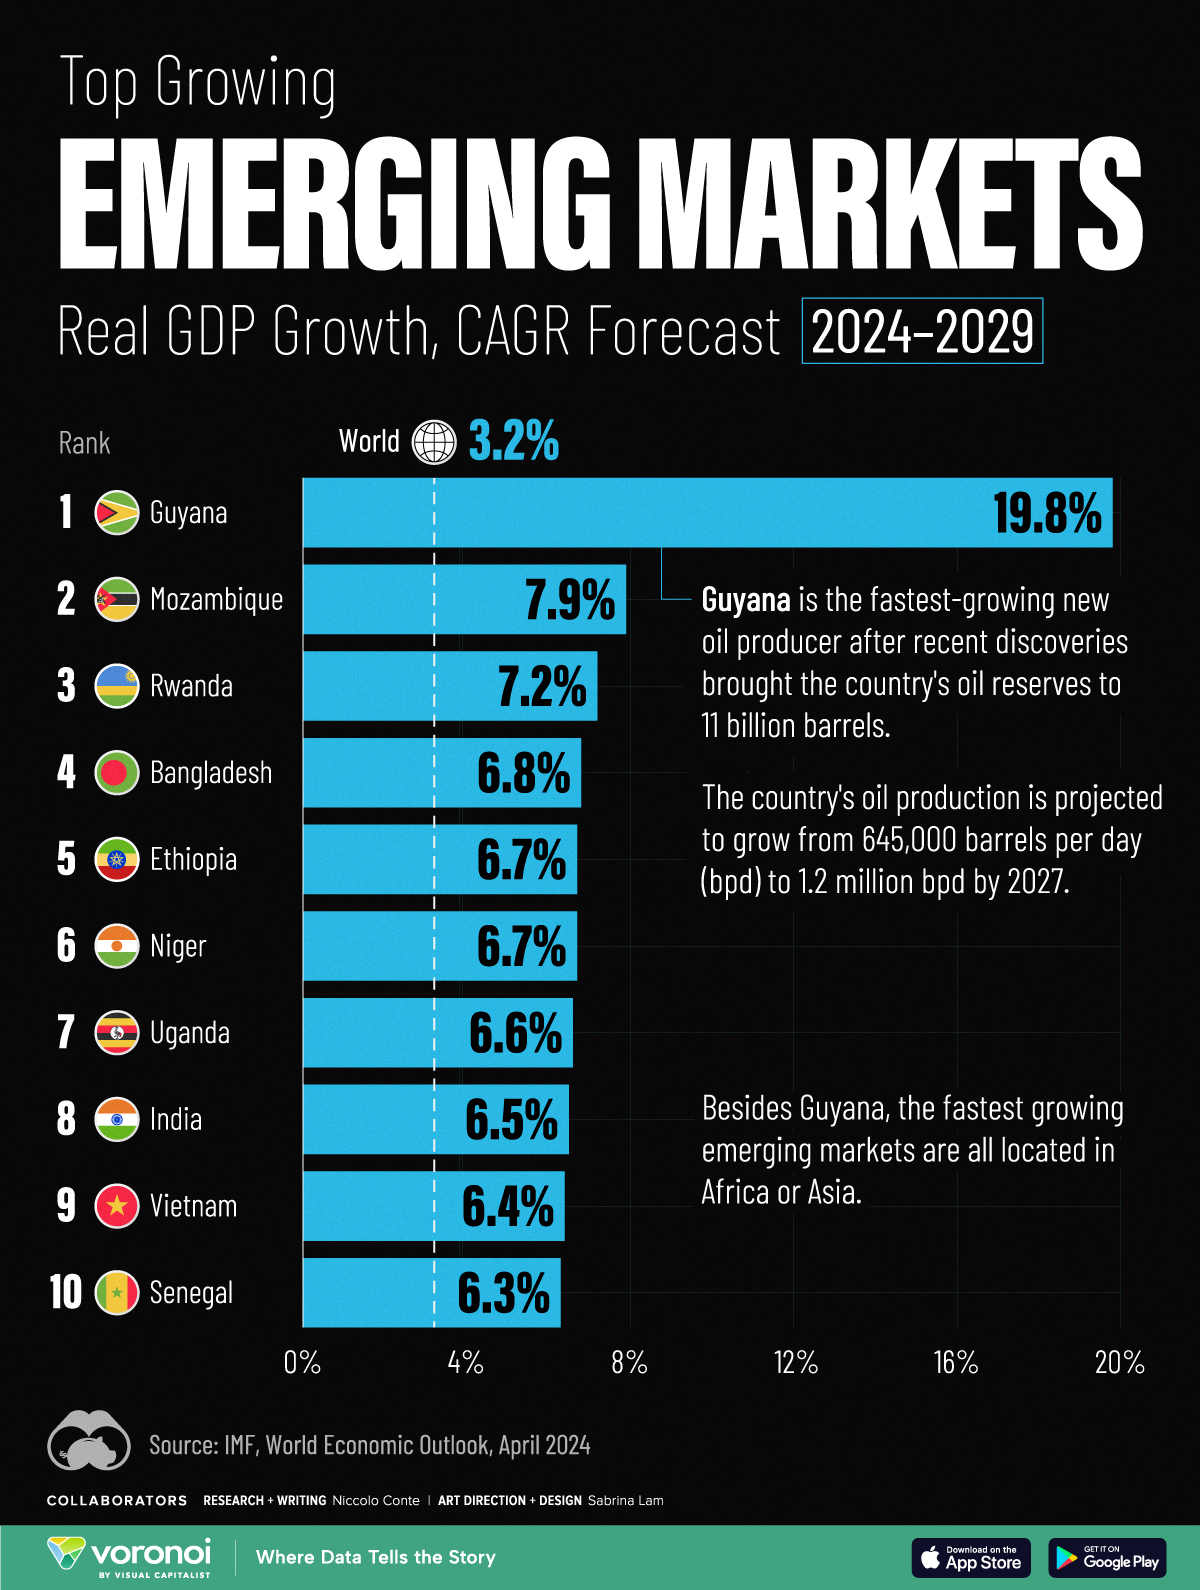 This bar chart shows the fastest growing emerging markets in the world between 2024 and 2029.